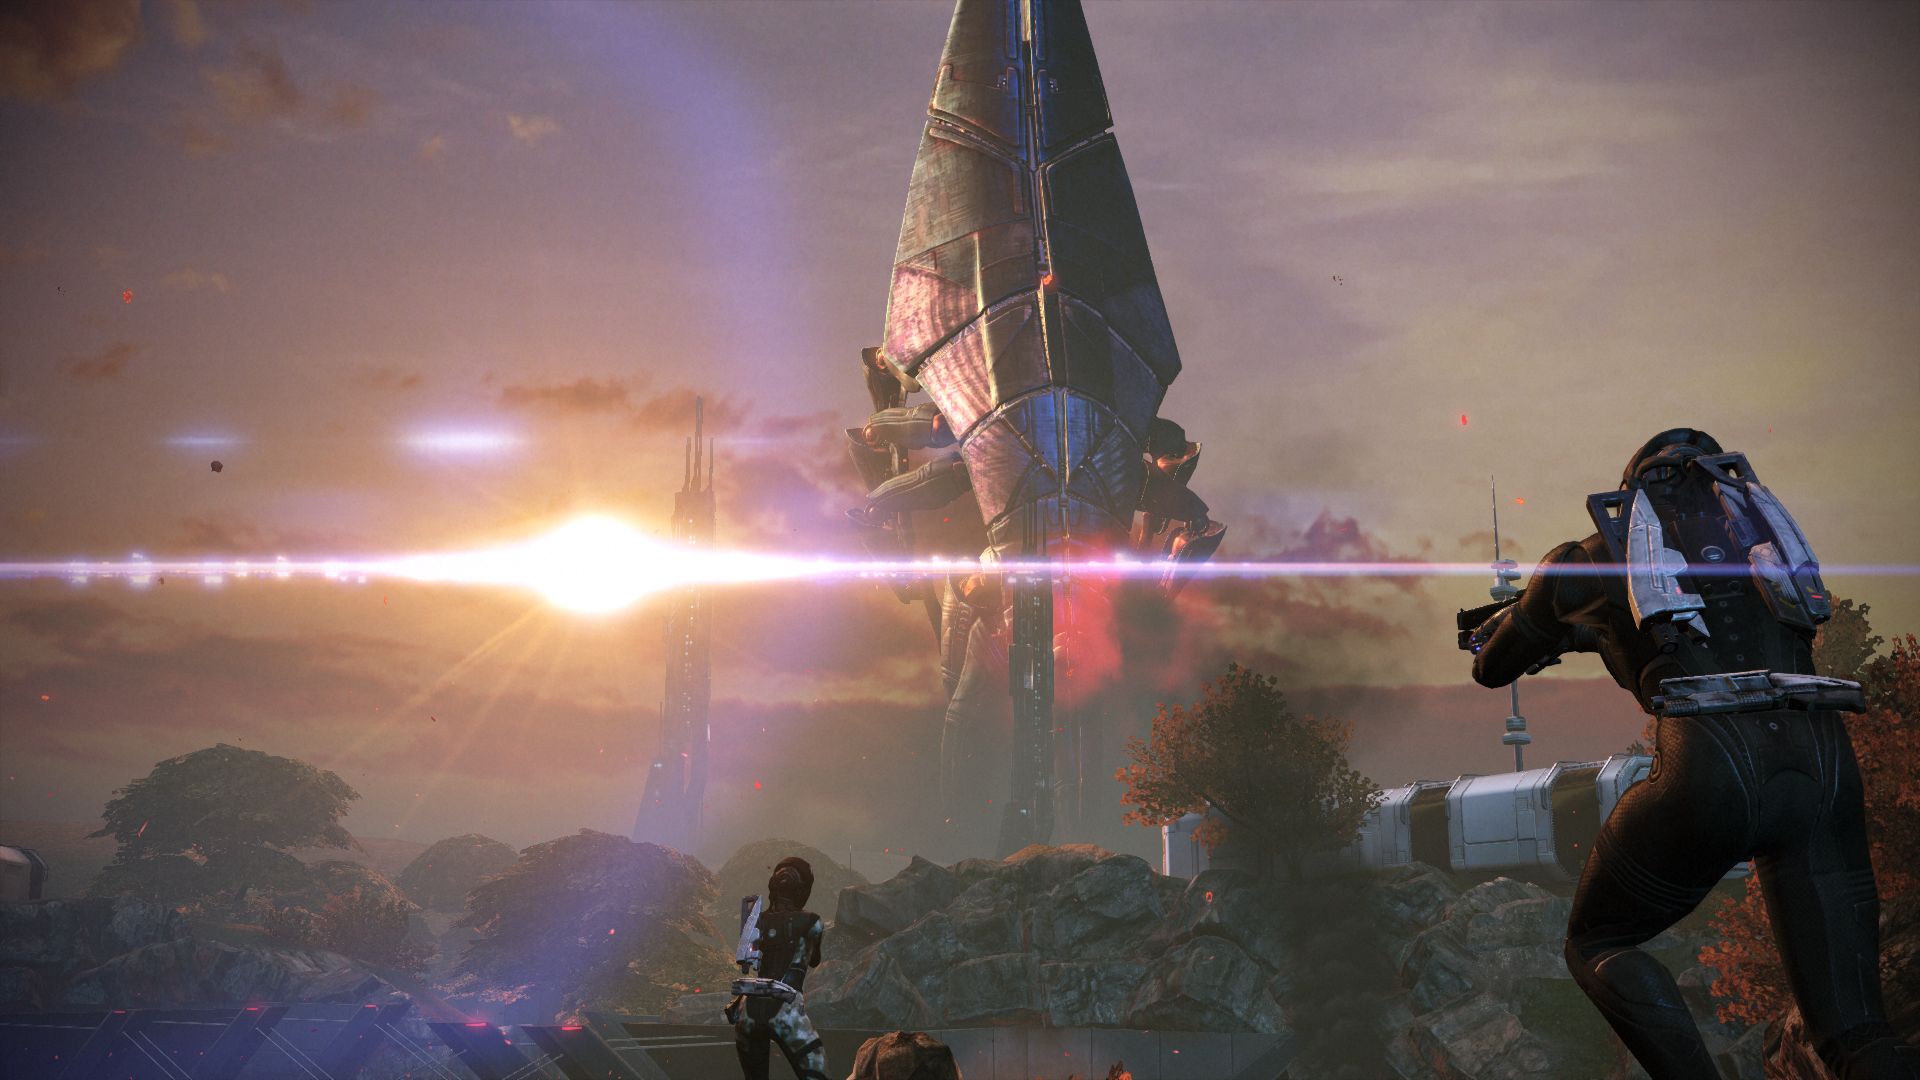 mass effect 3 readiness rating